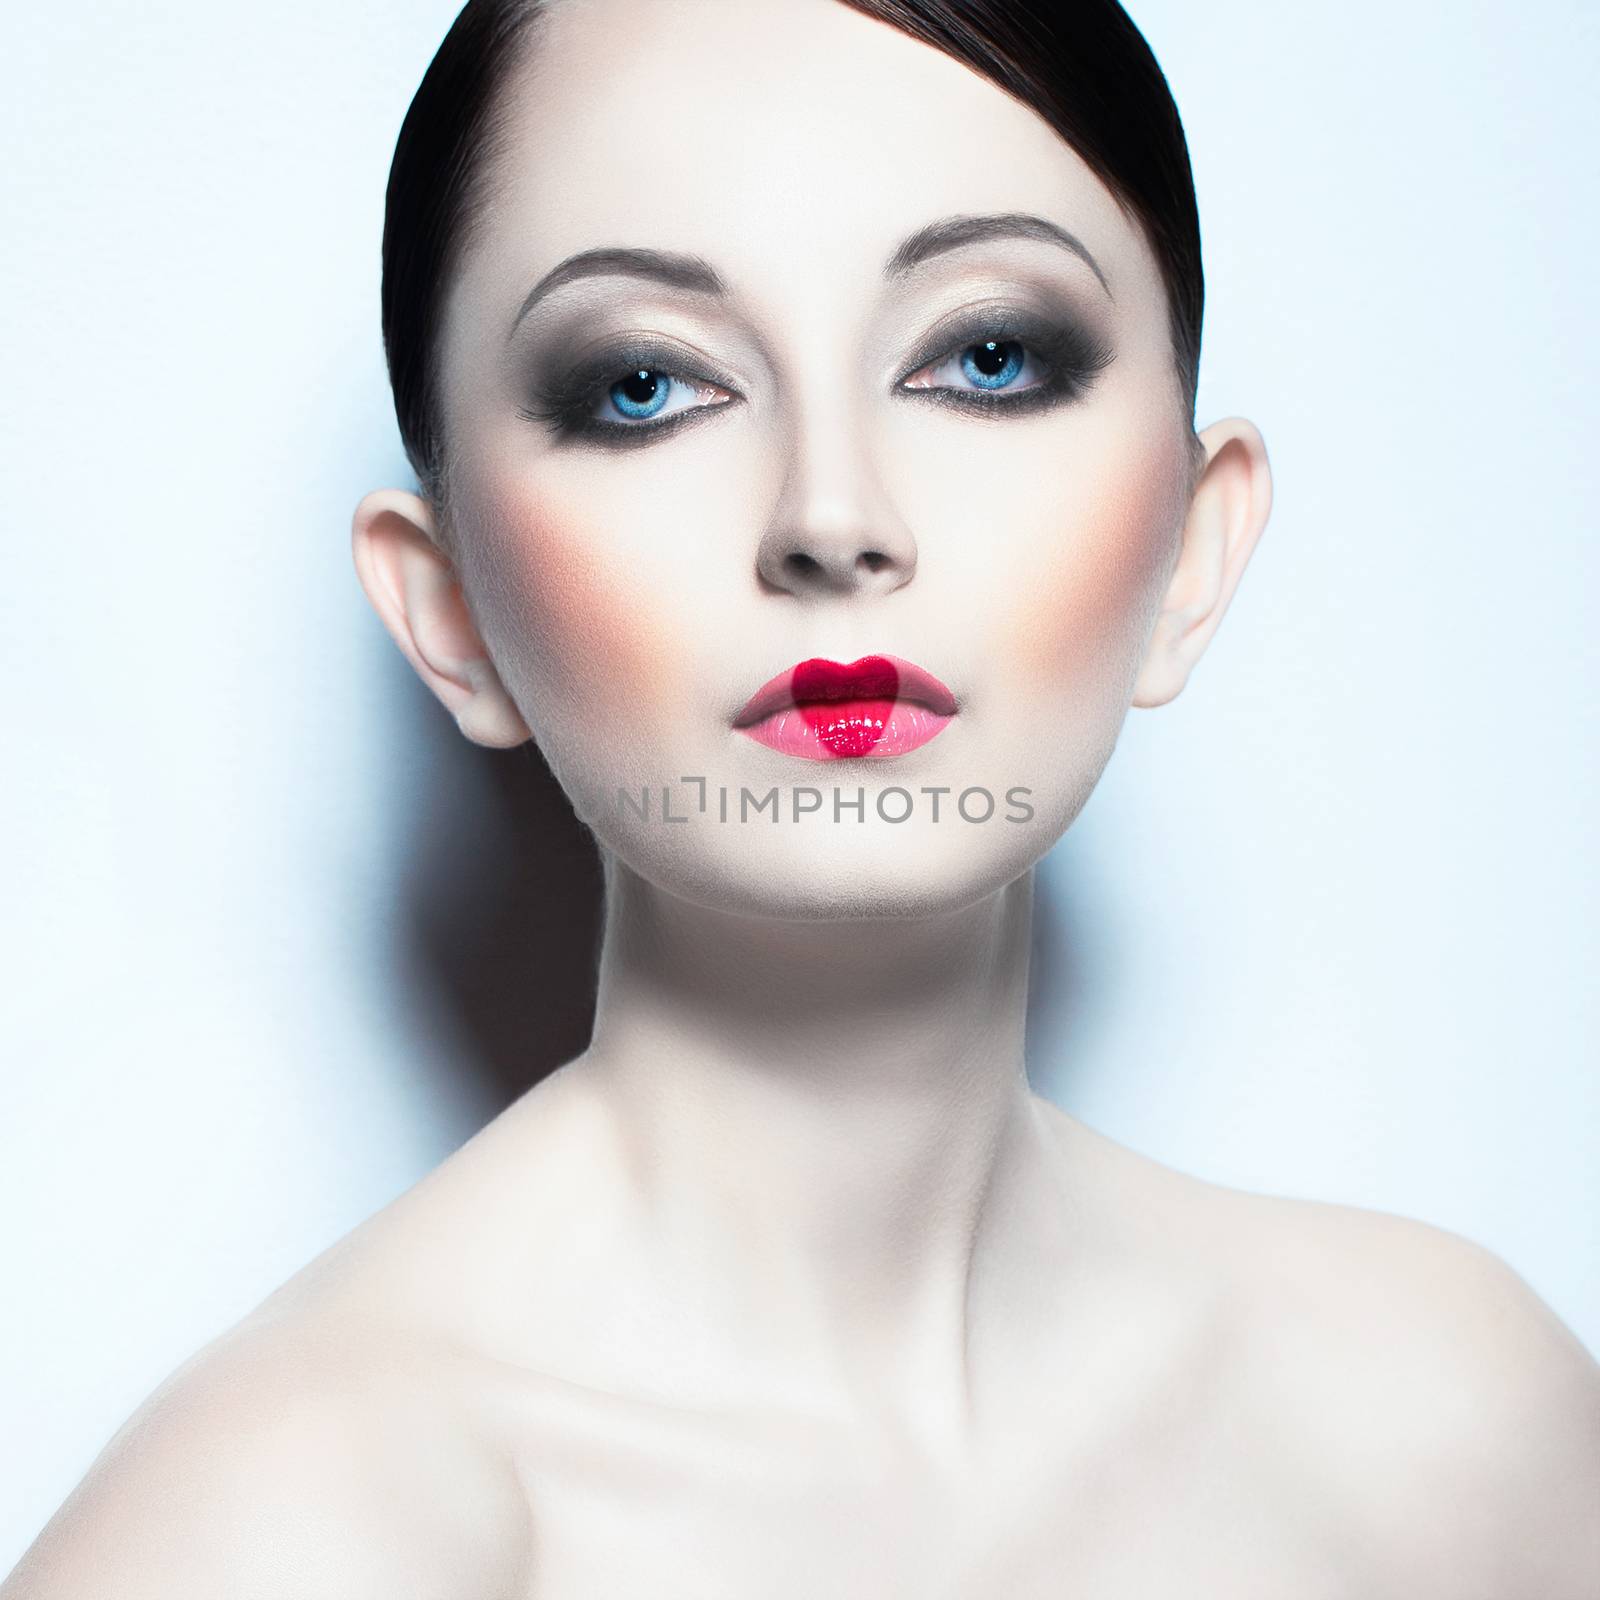 Portrait of a beautiful young woman like doll with a glamorous cool makeup